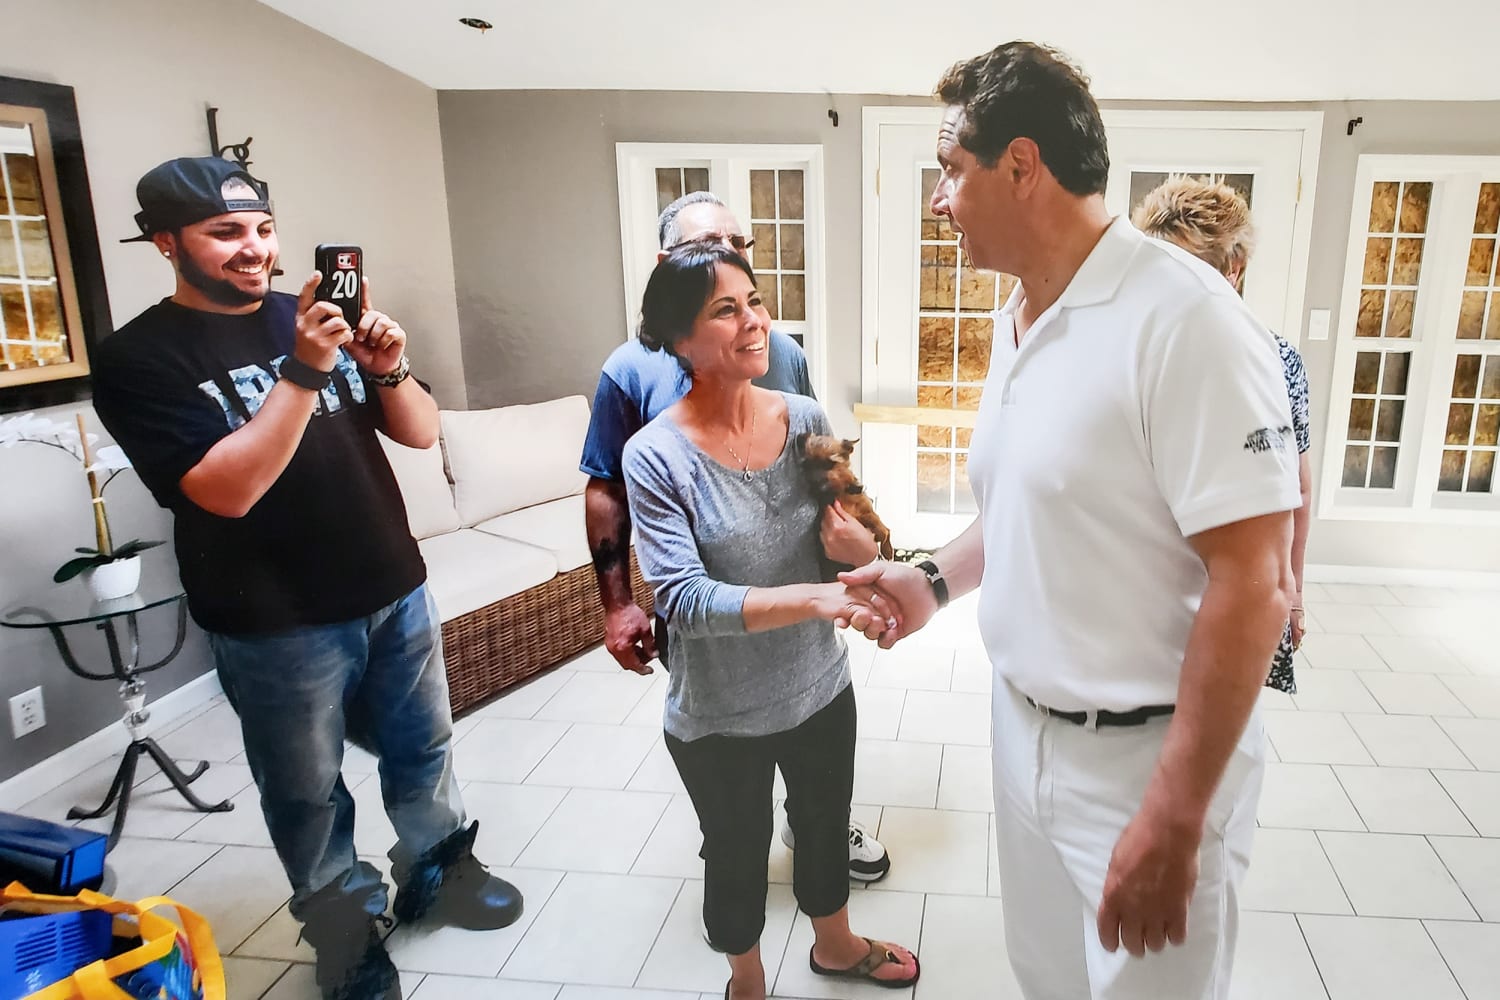 Strange and inappropriate Flood victim says Cuomo came onto her in her home